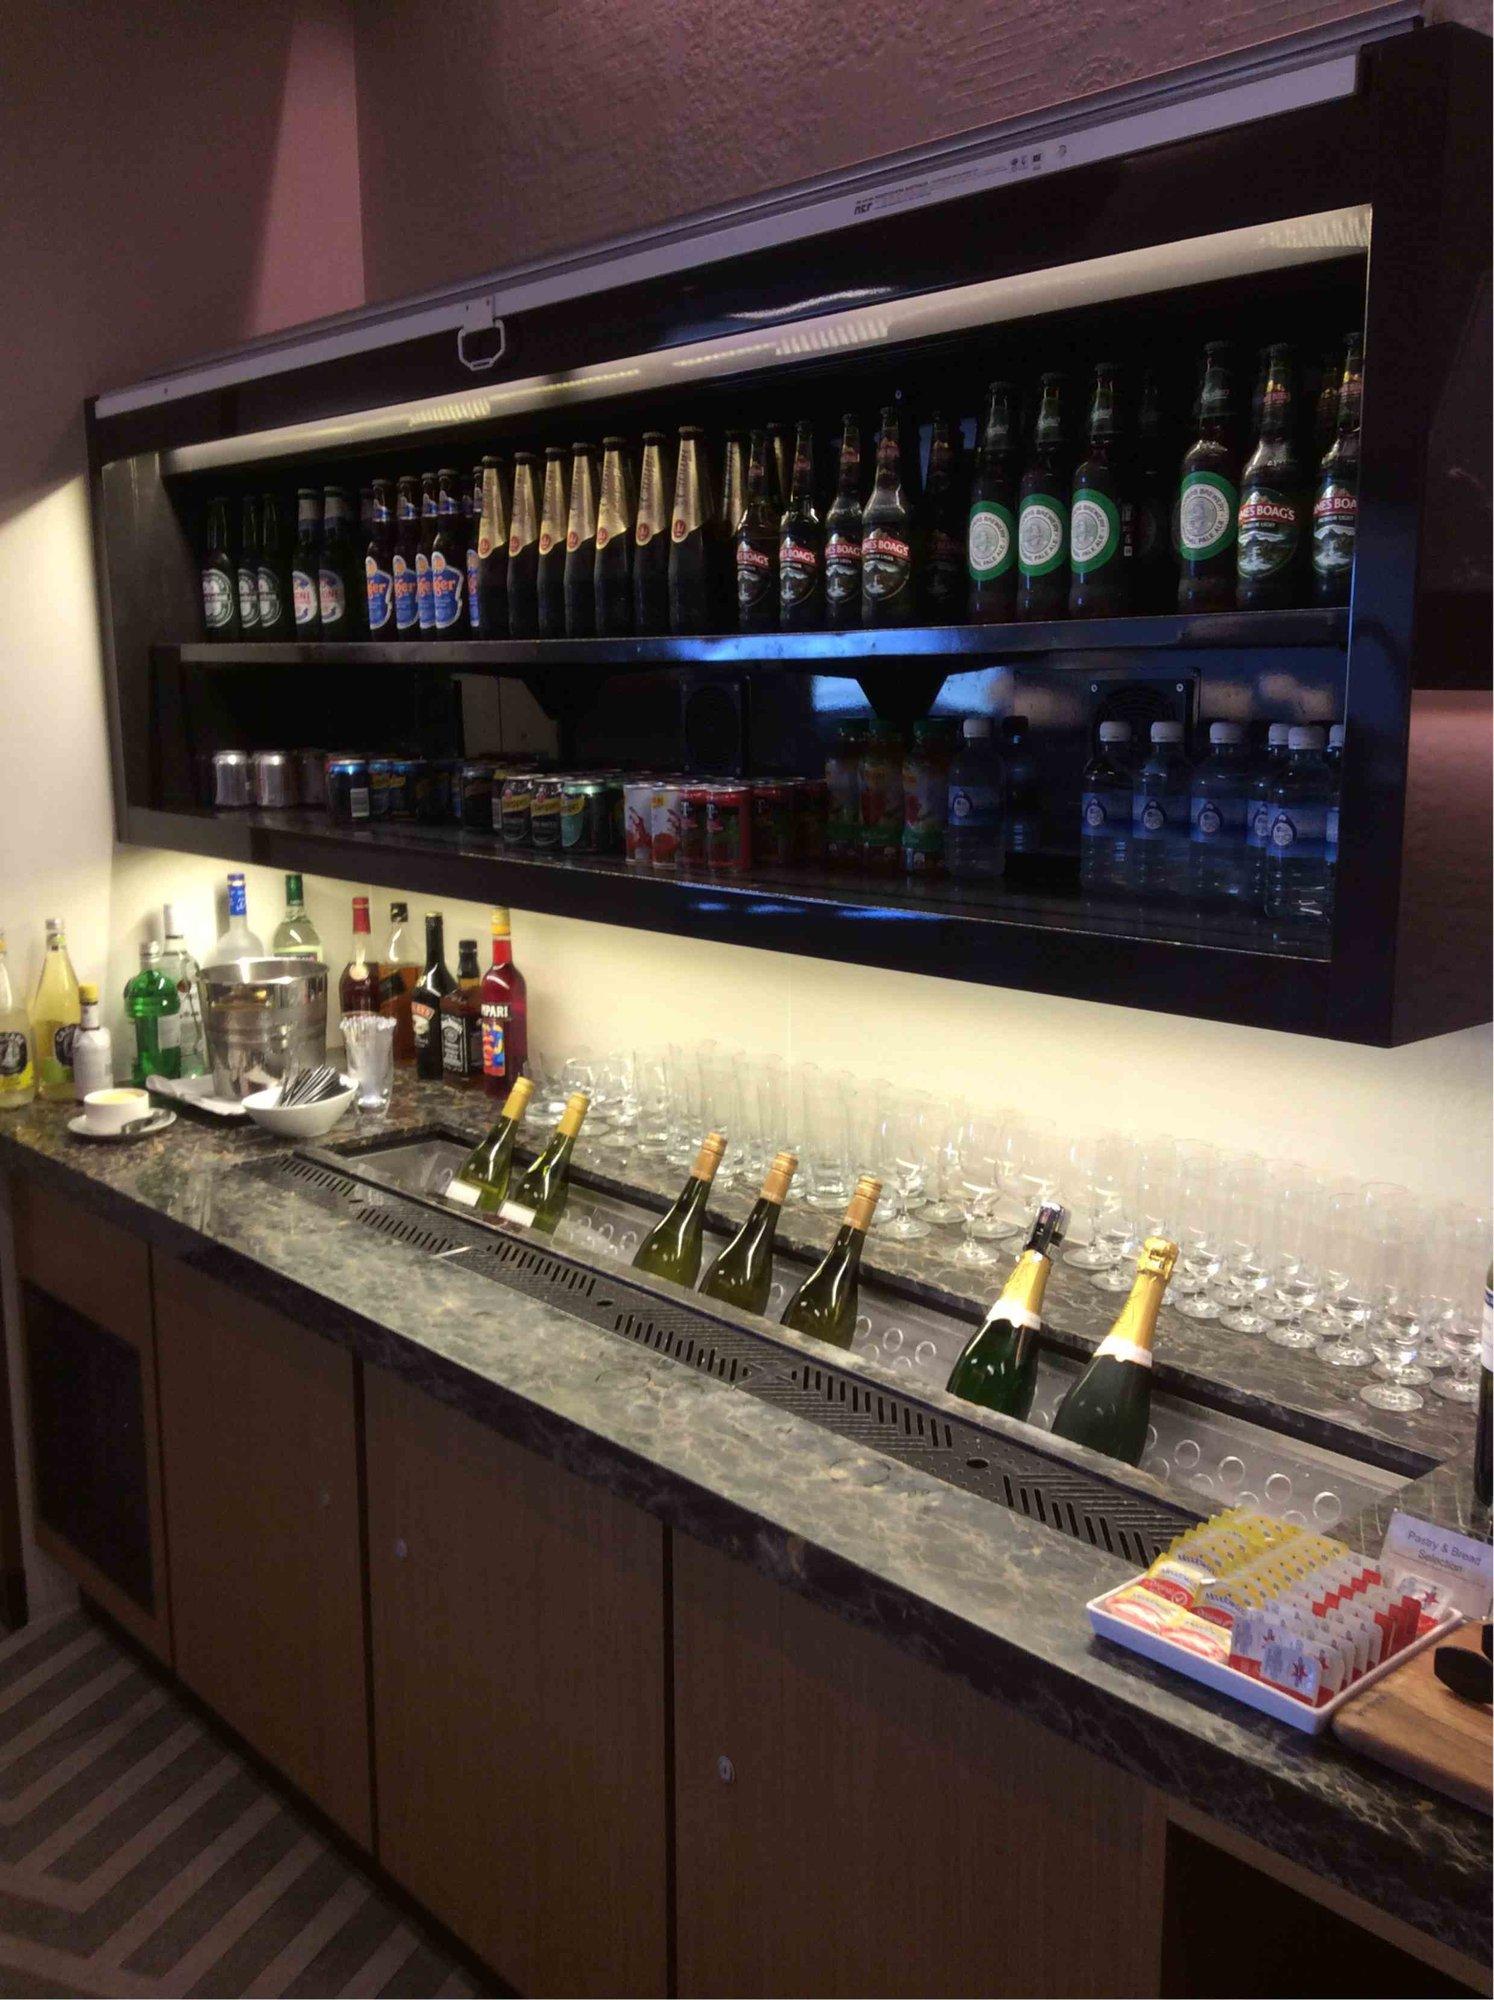 Singapore Airlines SilverKris Business Class Lounge image 1 of 20